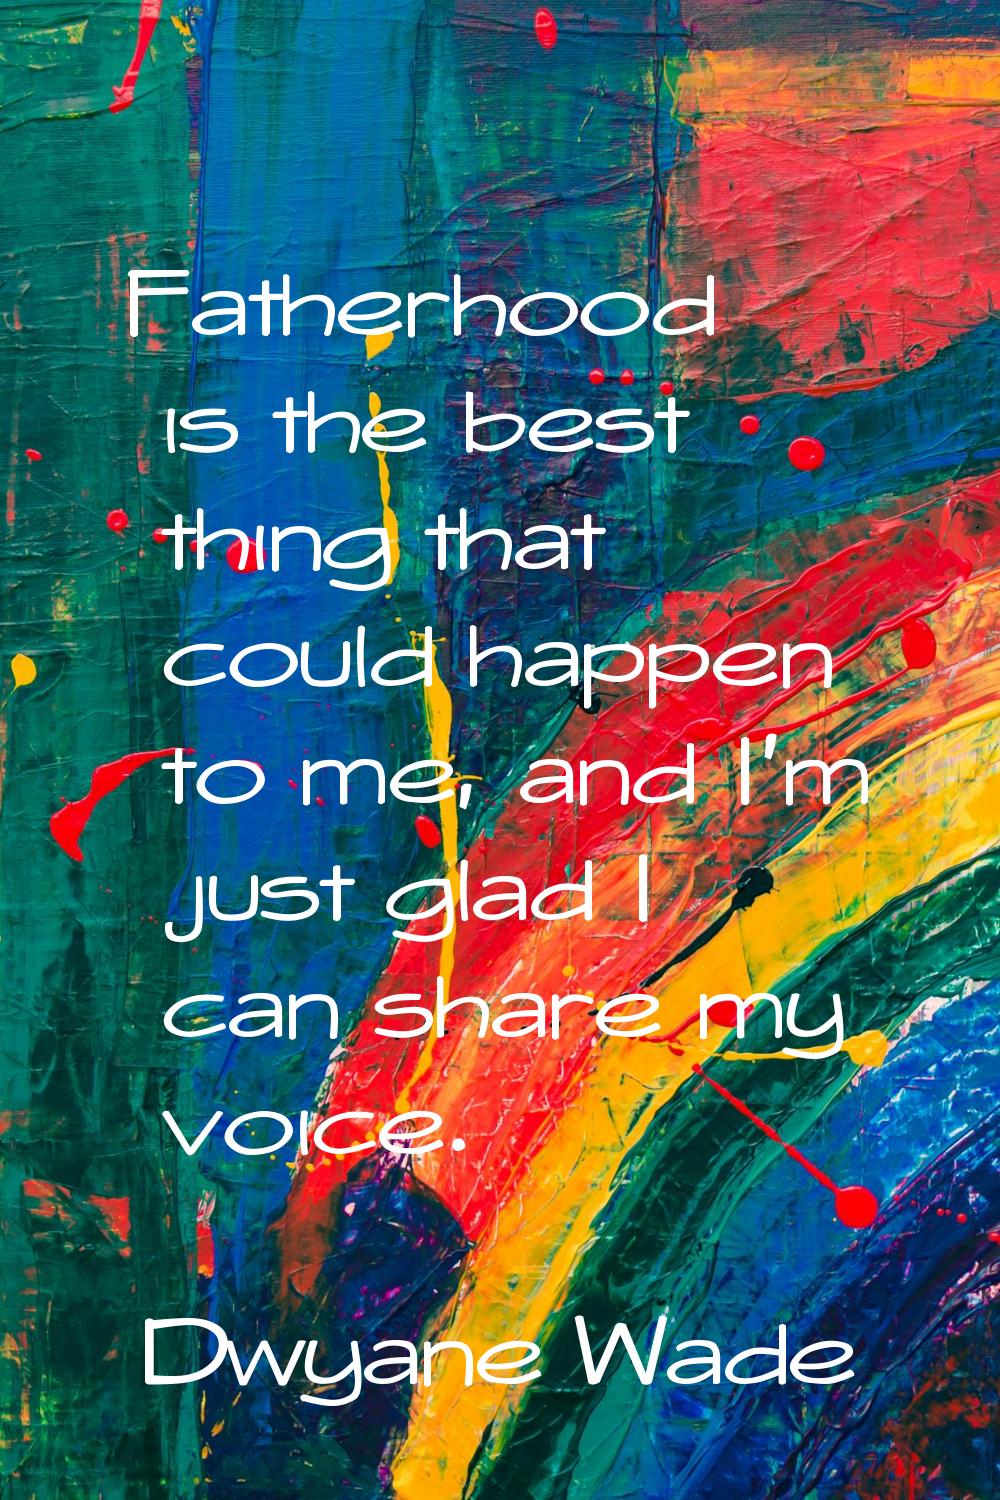 Fatherhood is the best thing that could happen to me, and I'm just glad I can share my voice.